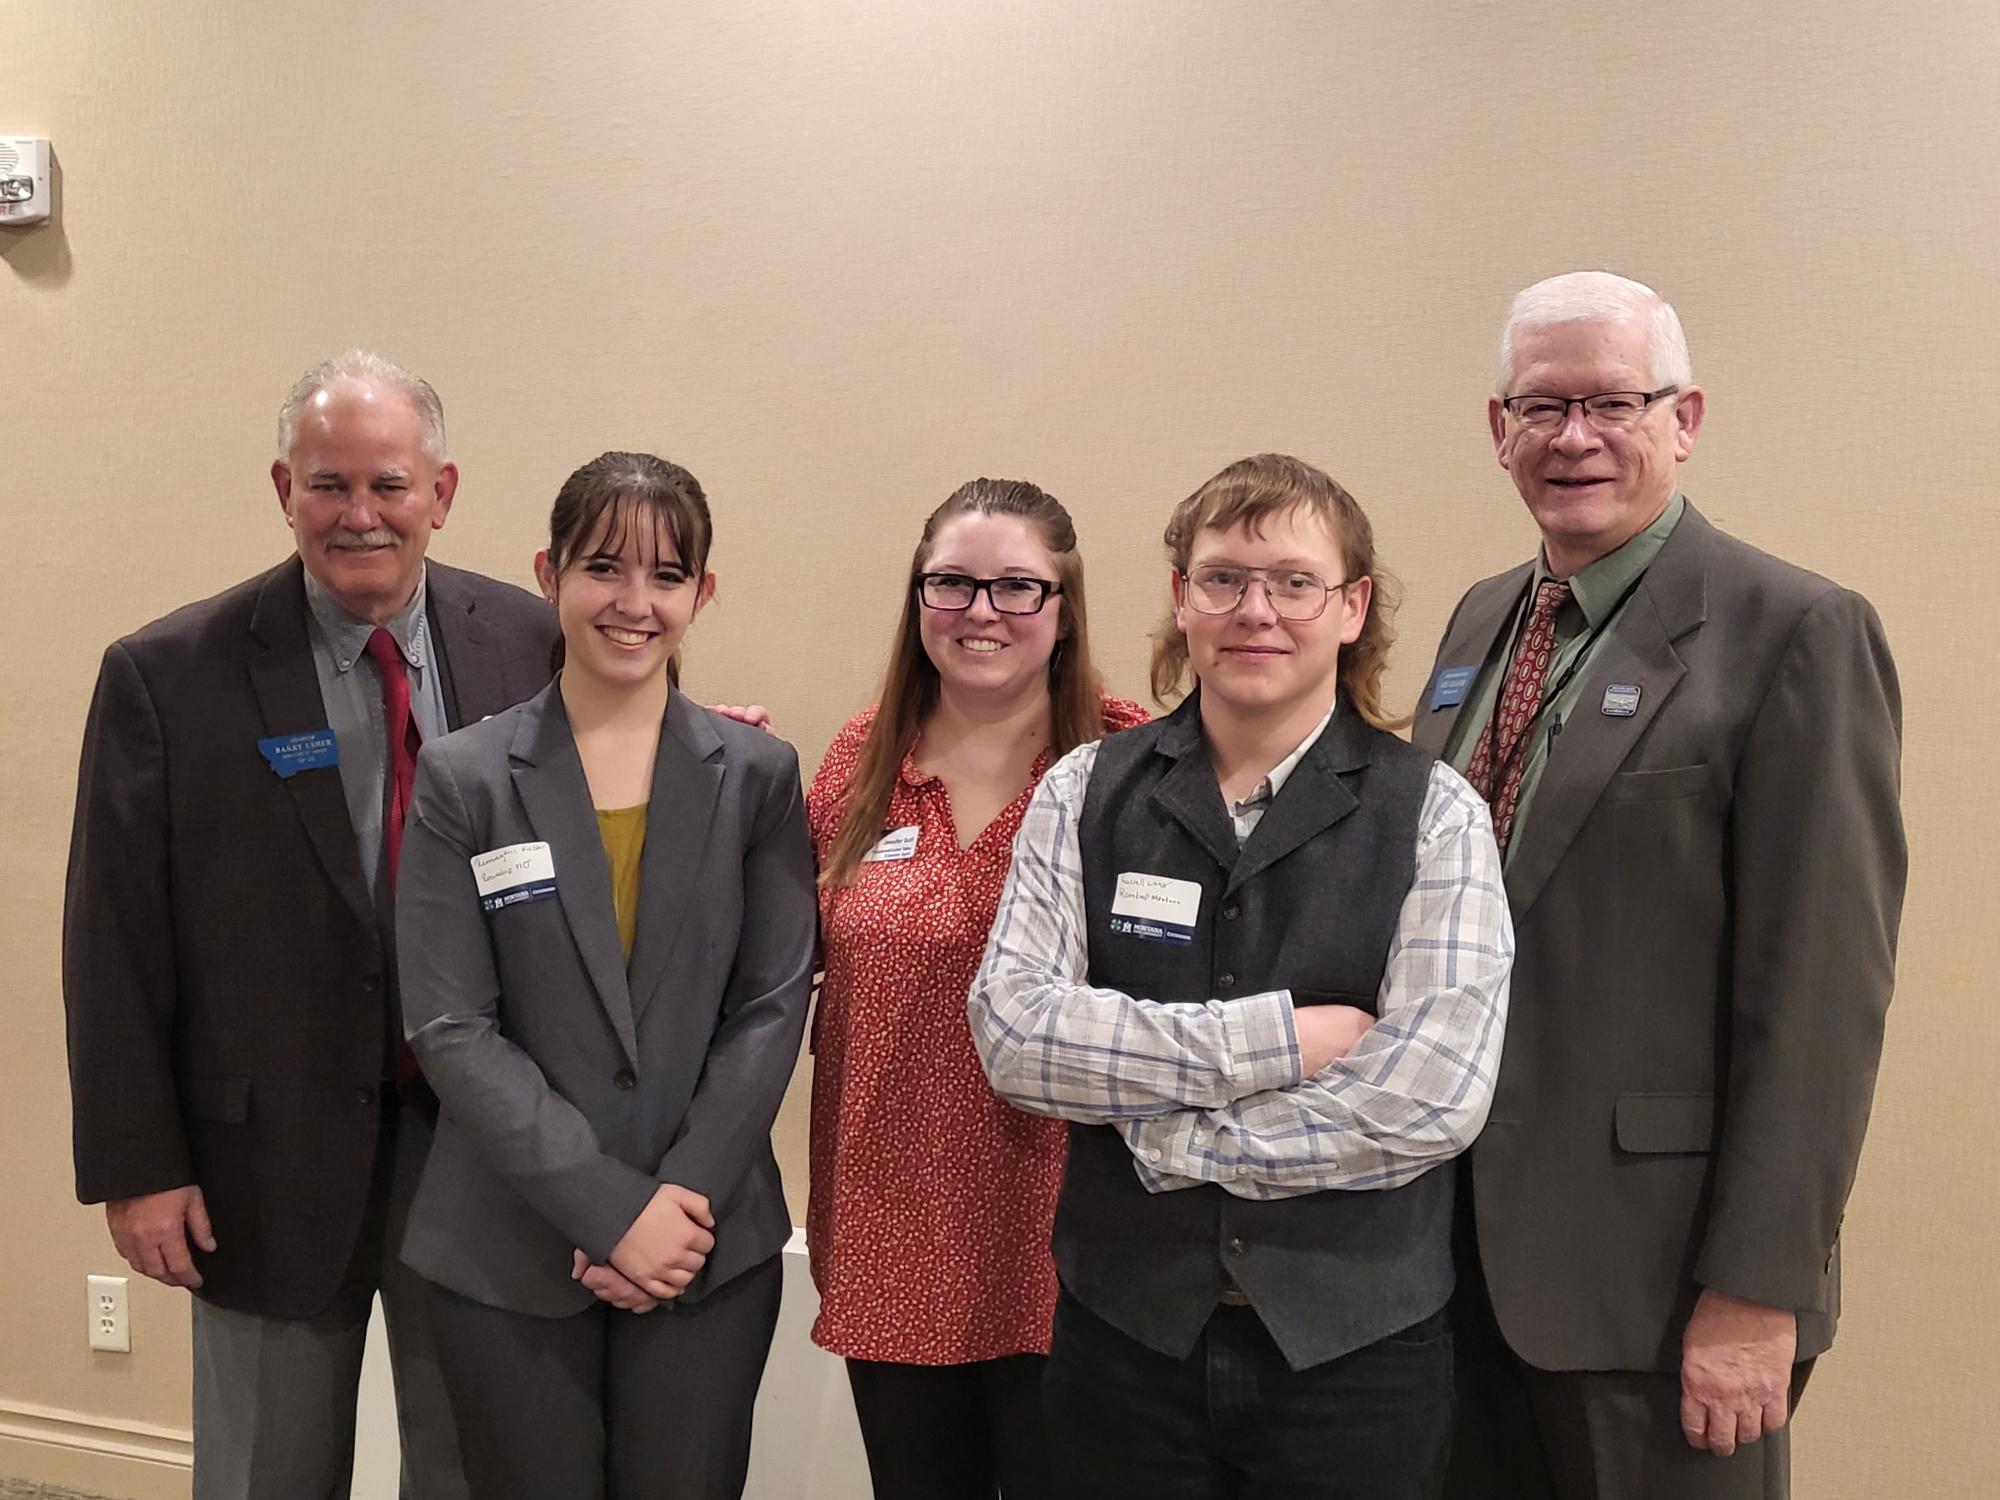 Pictured left to right: Senator Barry Usher, Remington Hiester, Jennifer Solf, Russell Lang, and Representative Greg Oblander